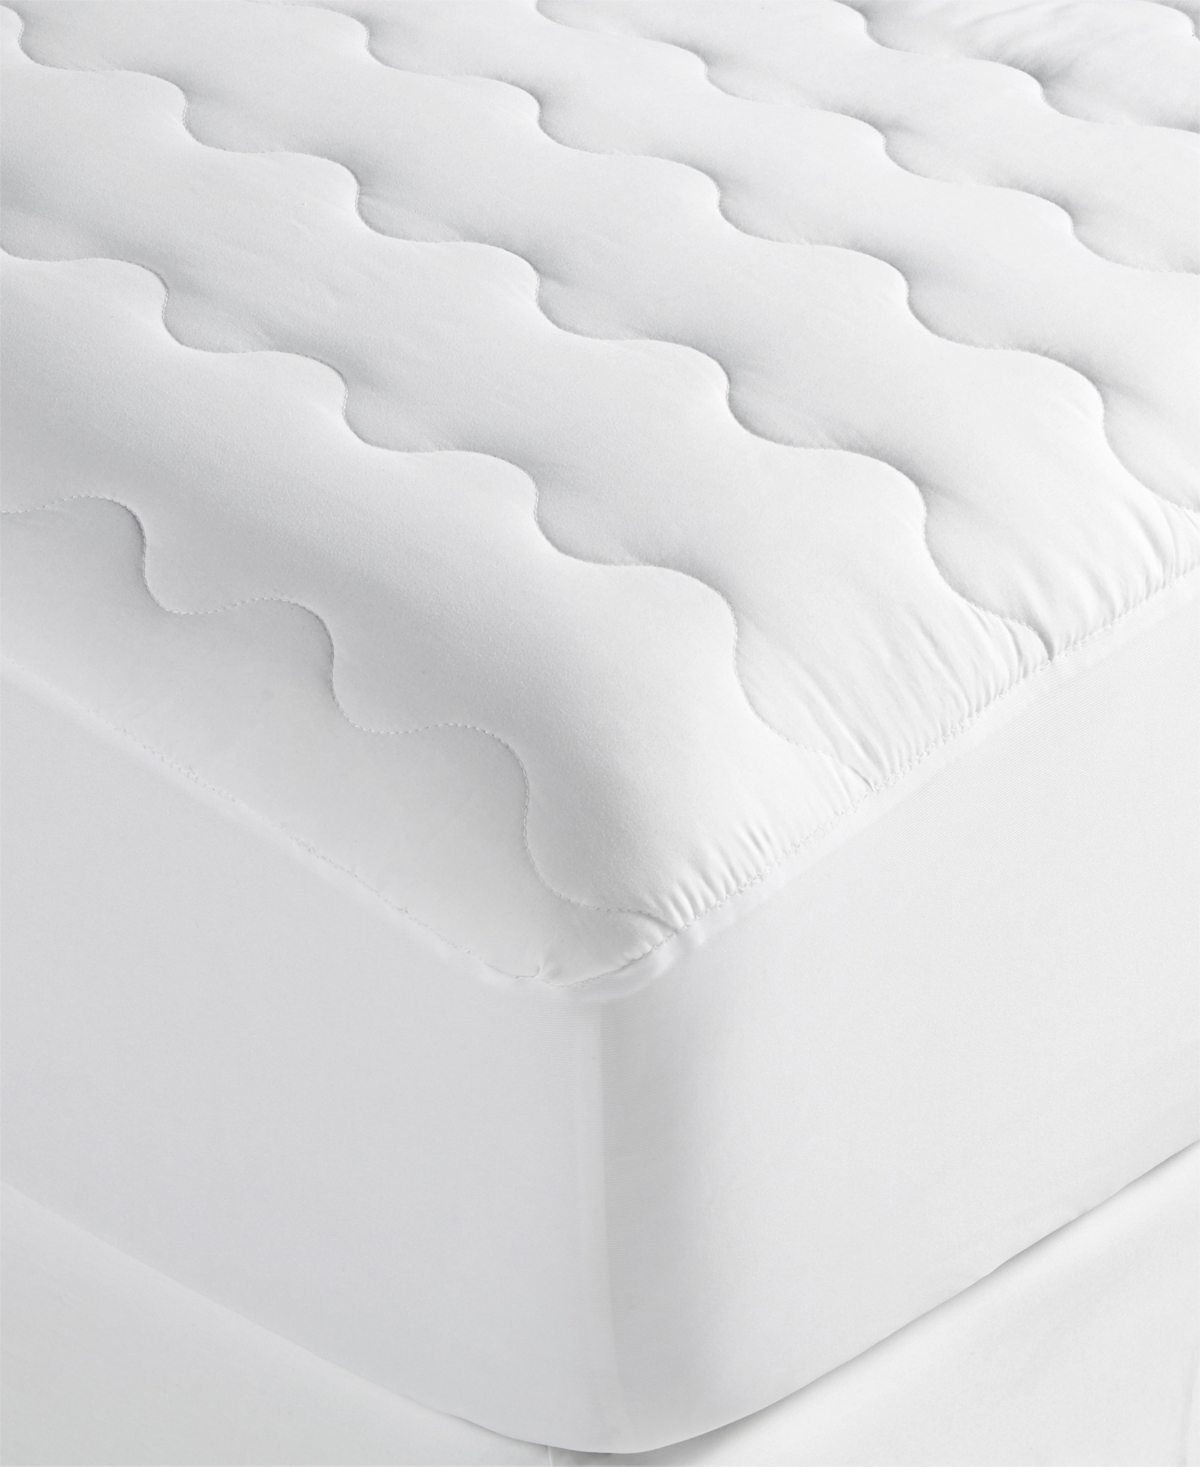 Shop Home Design Easy Care Waterproof Mattress Pads, Twin, Created For Macy's In White